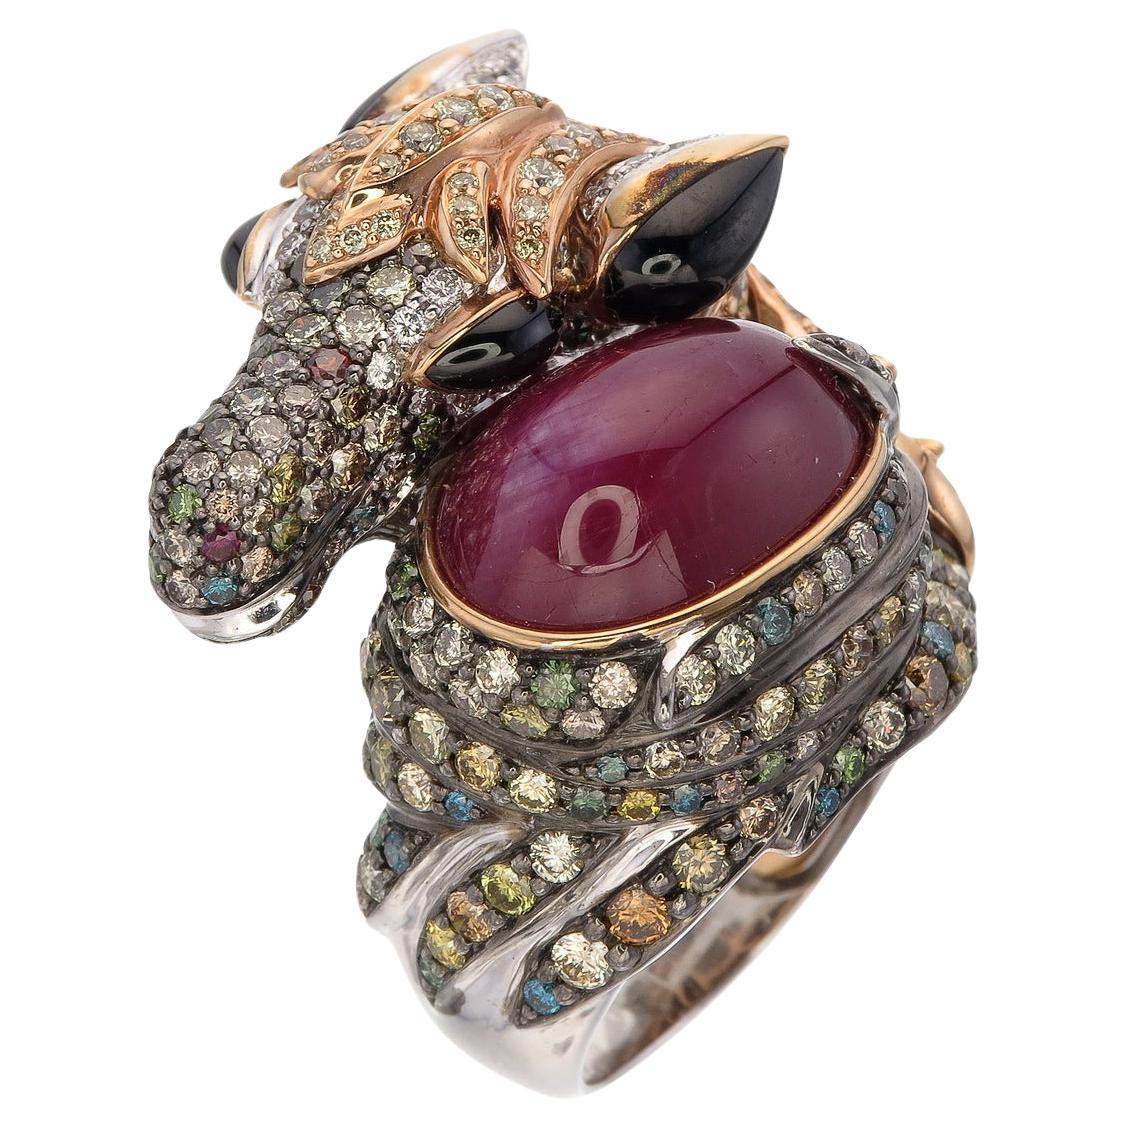 Zorab Creation Dazzling Equestrian Elegance Ring  with 18.76 carat Ruby  For Sale